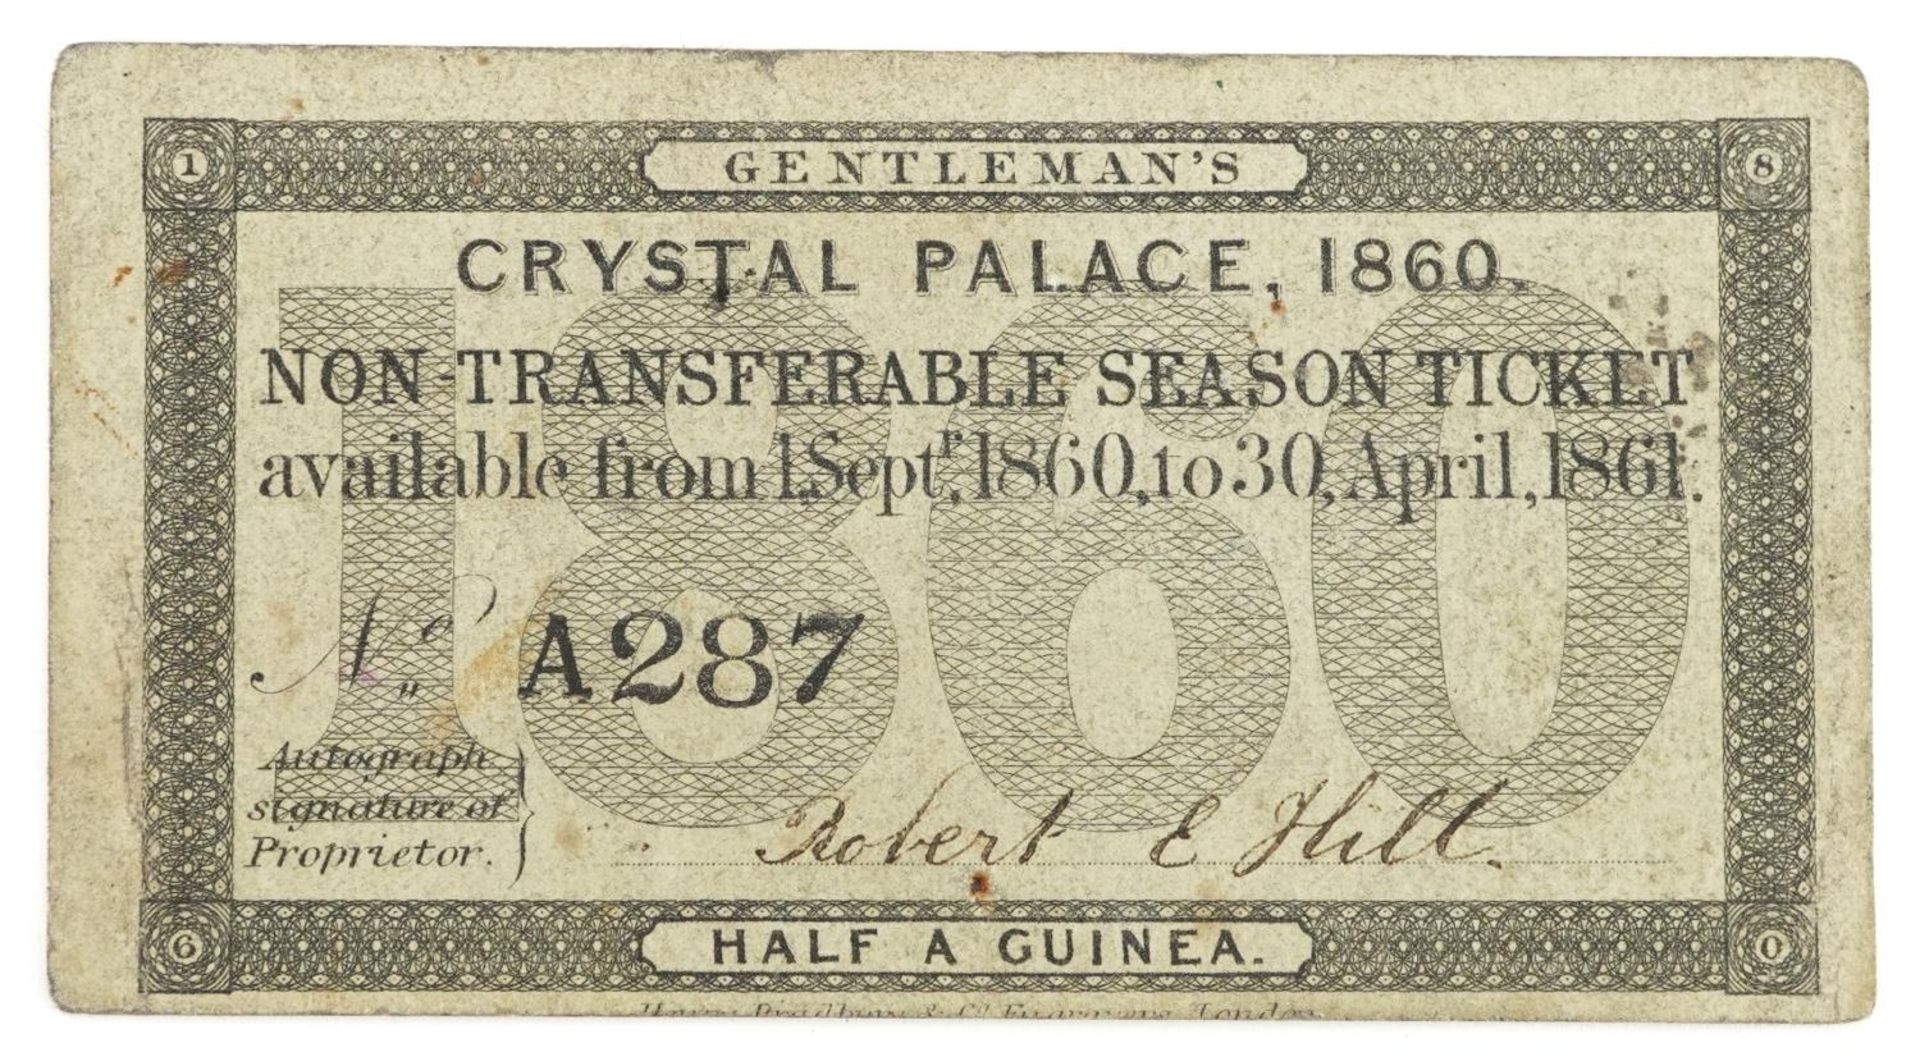 Gentlemen's 1860 Crystal Palace Exhibition season ticket numbered A287, inscribed Robert E Hill :